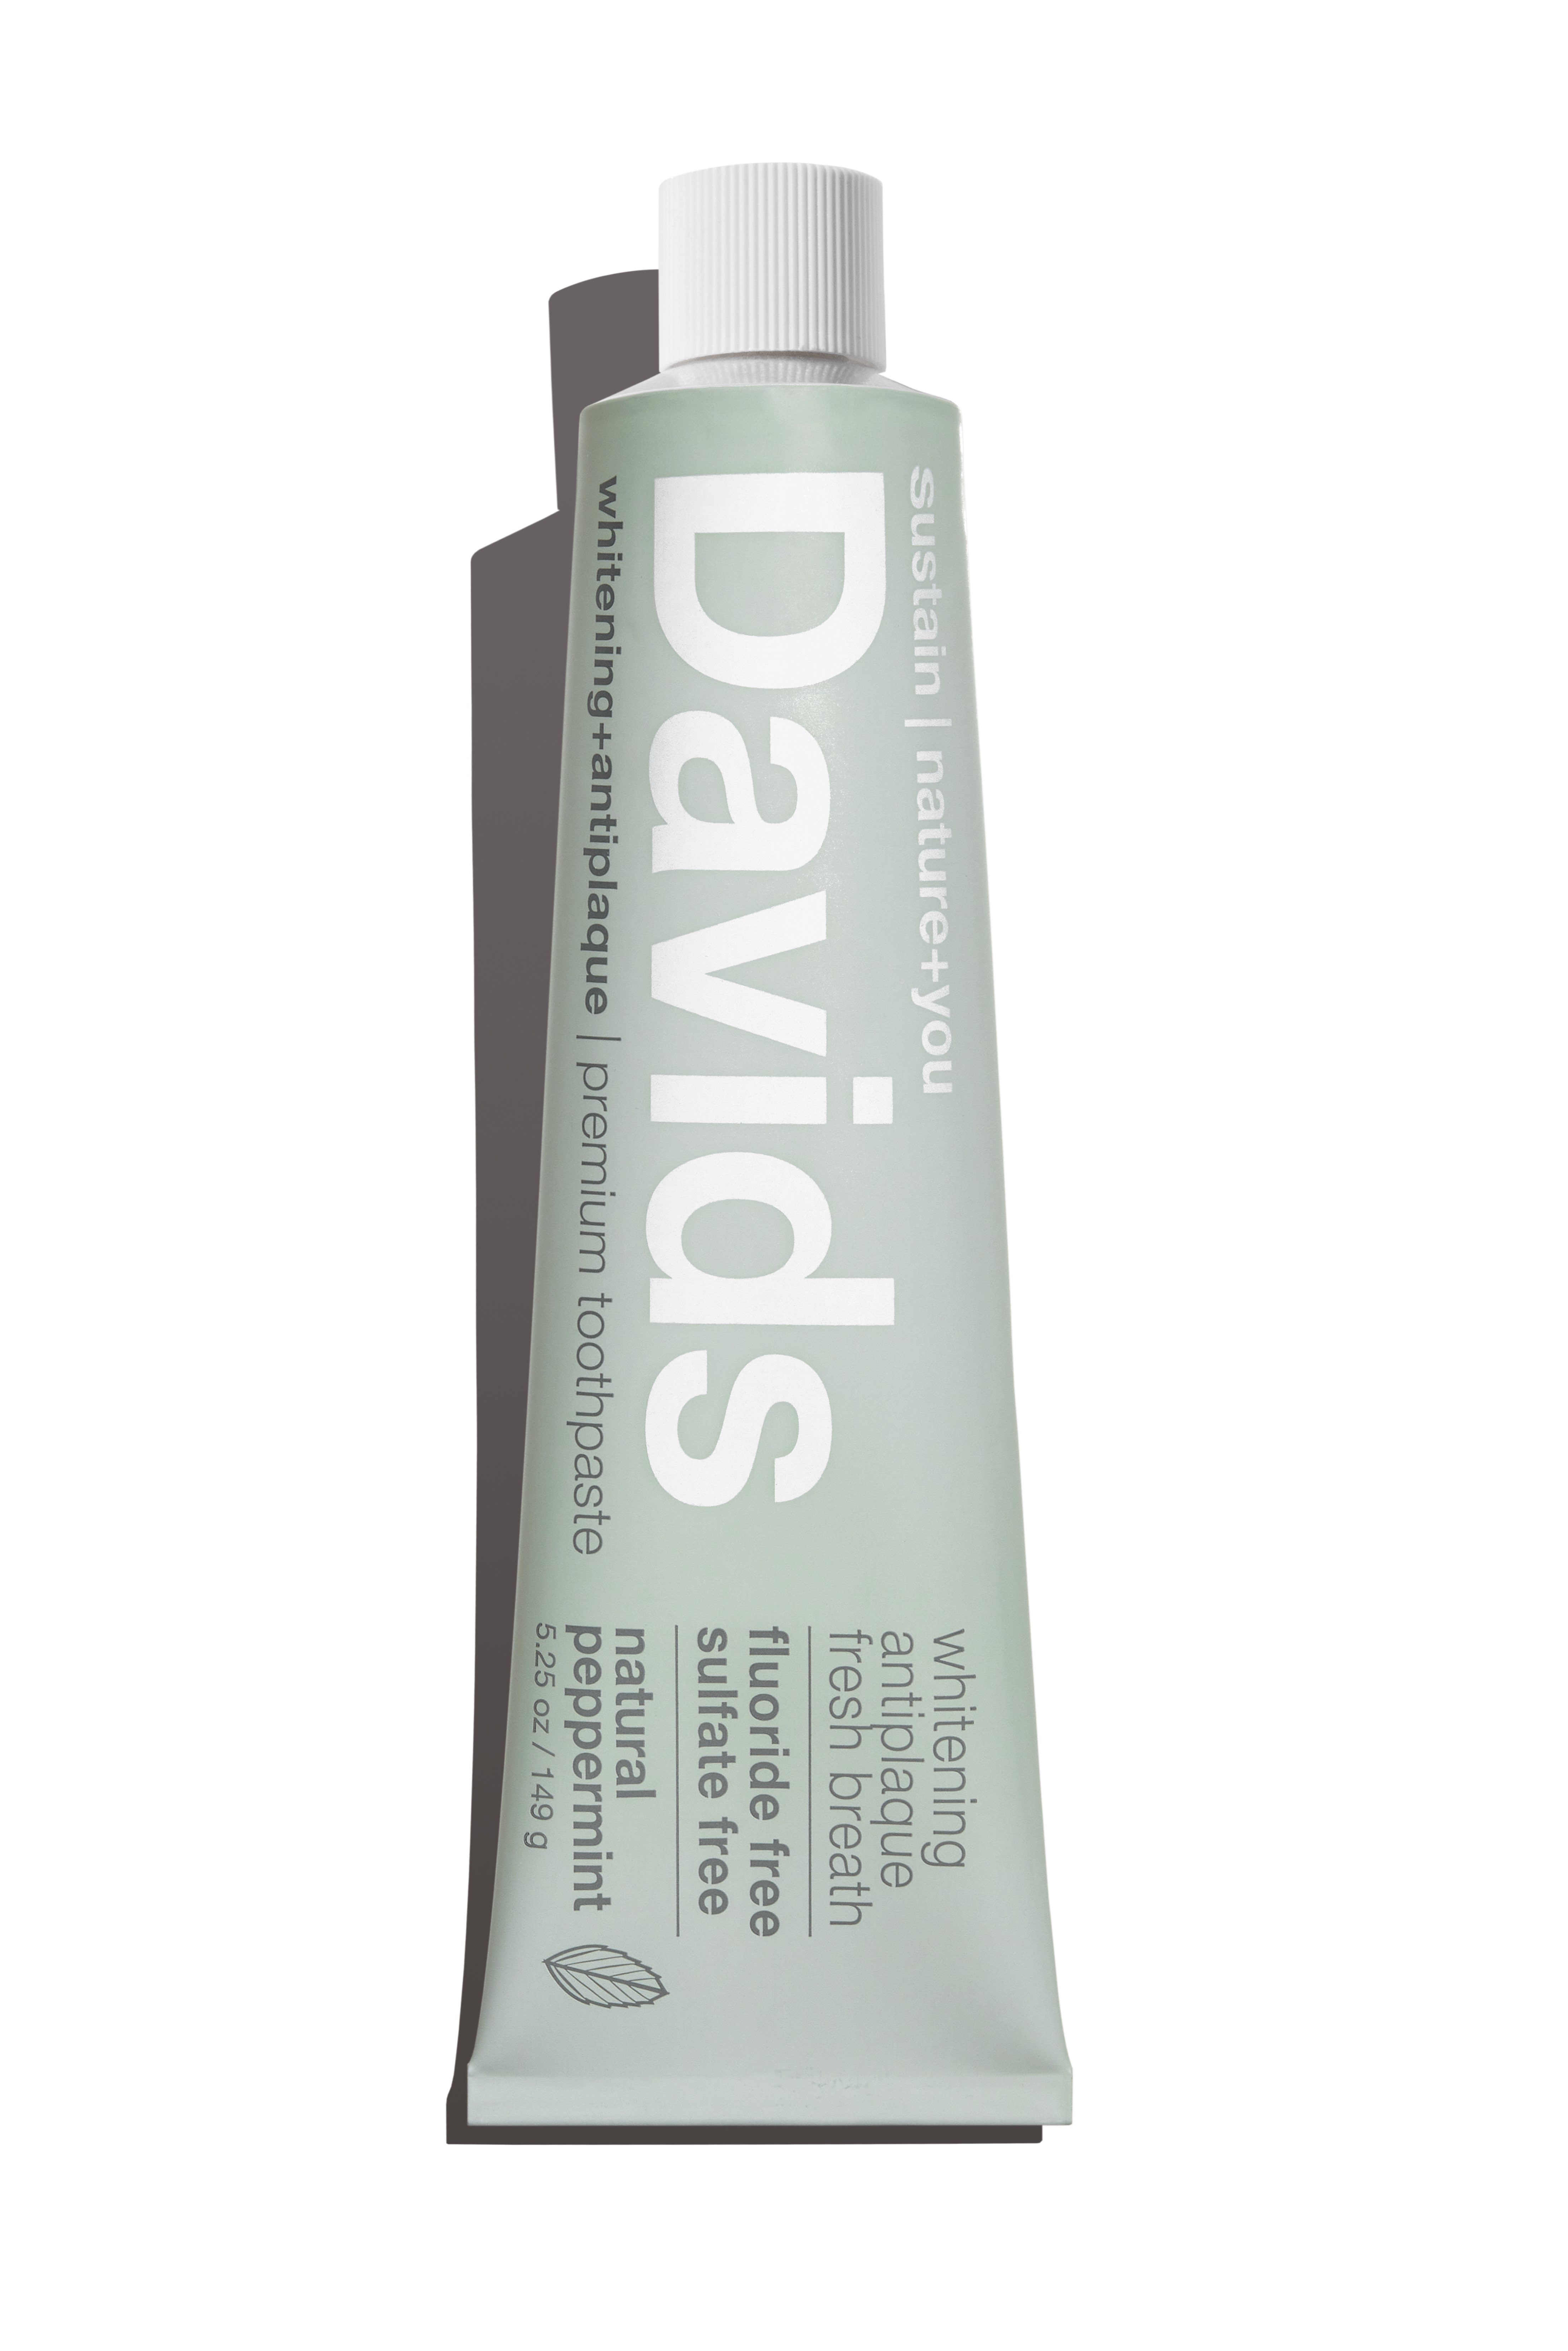 Davids Premium Natural Toothpaste, Natural Peppermint